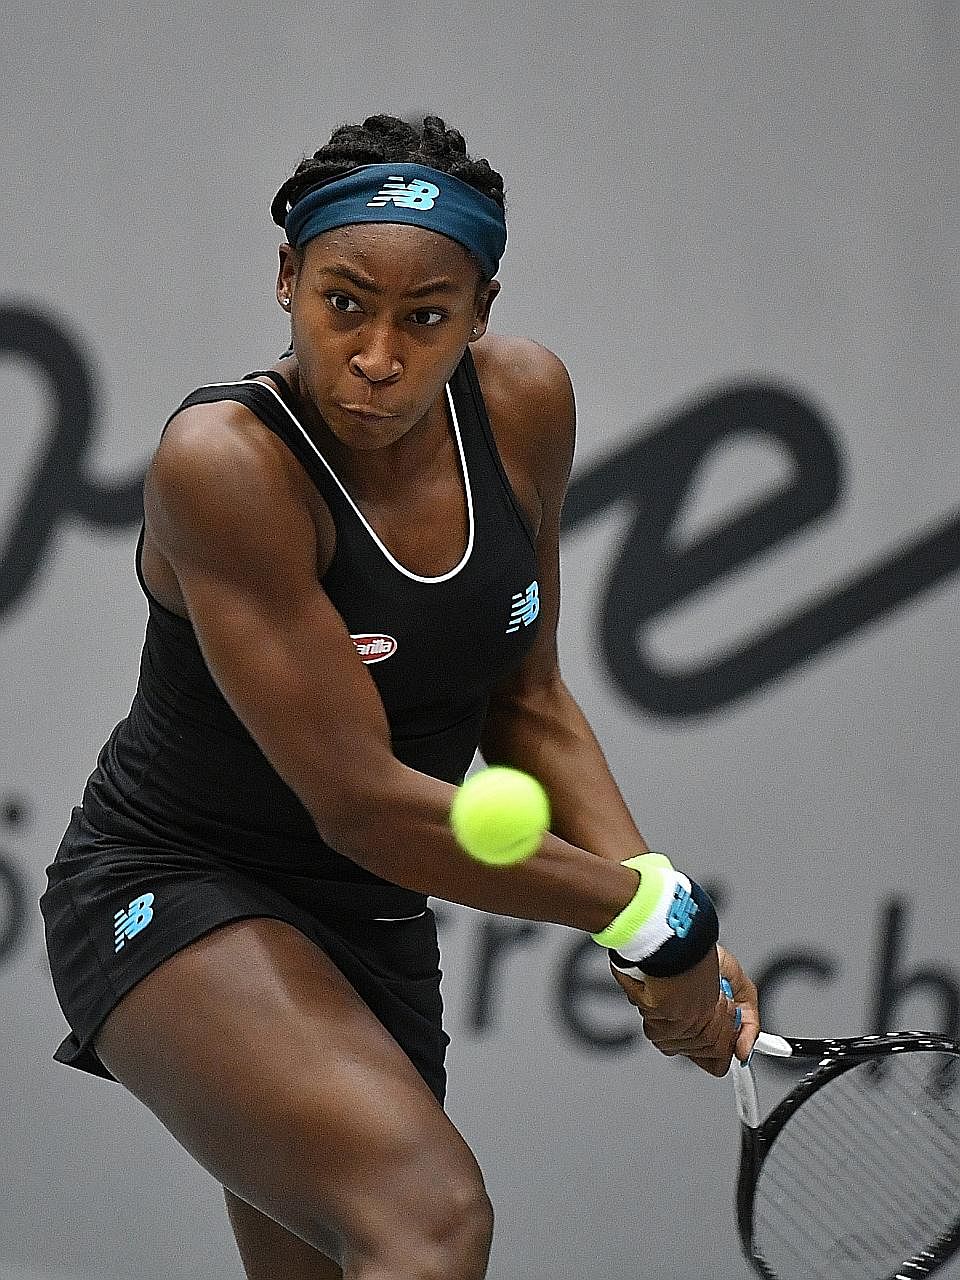 Teenage prodigy Coco Gauff on the way to claiming her first WTA title with a 6-3, 1-6, 6-2 victory over former French Open champion Jelena Ostapenko in Linz yesterday. PHOTO: DPA